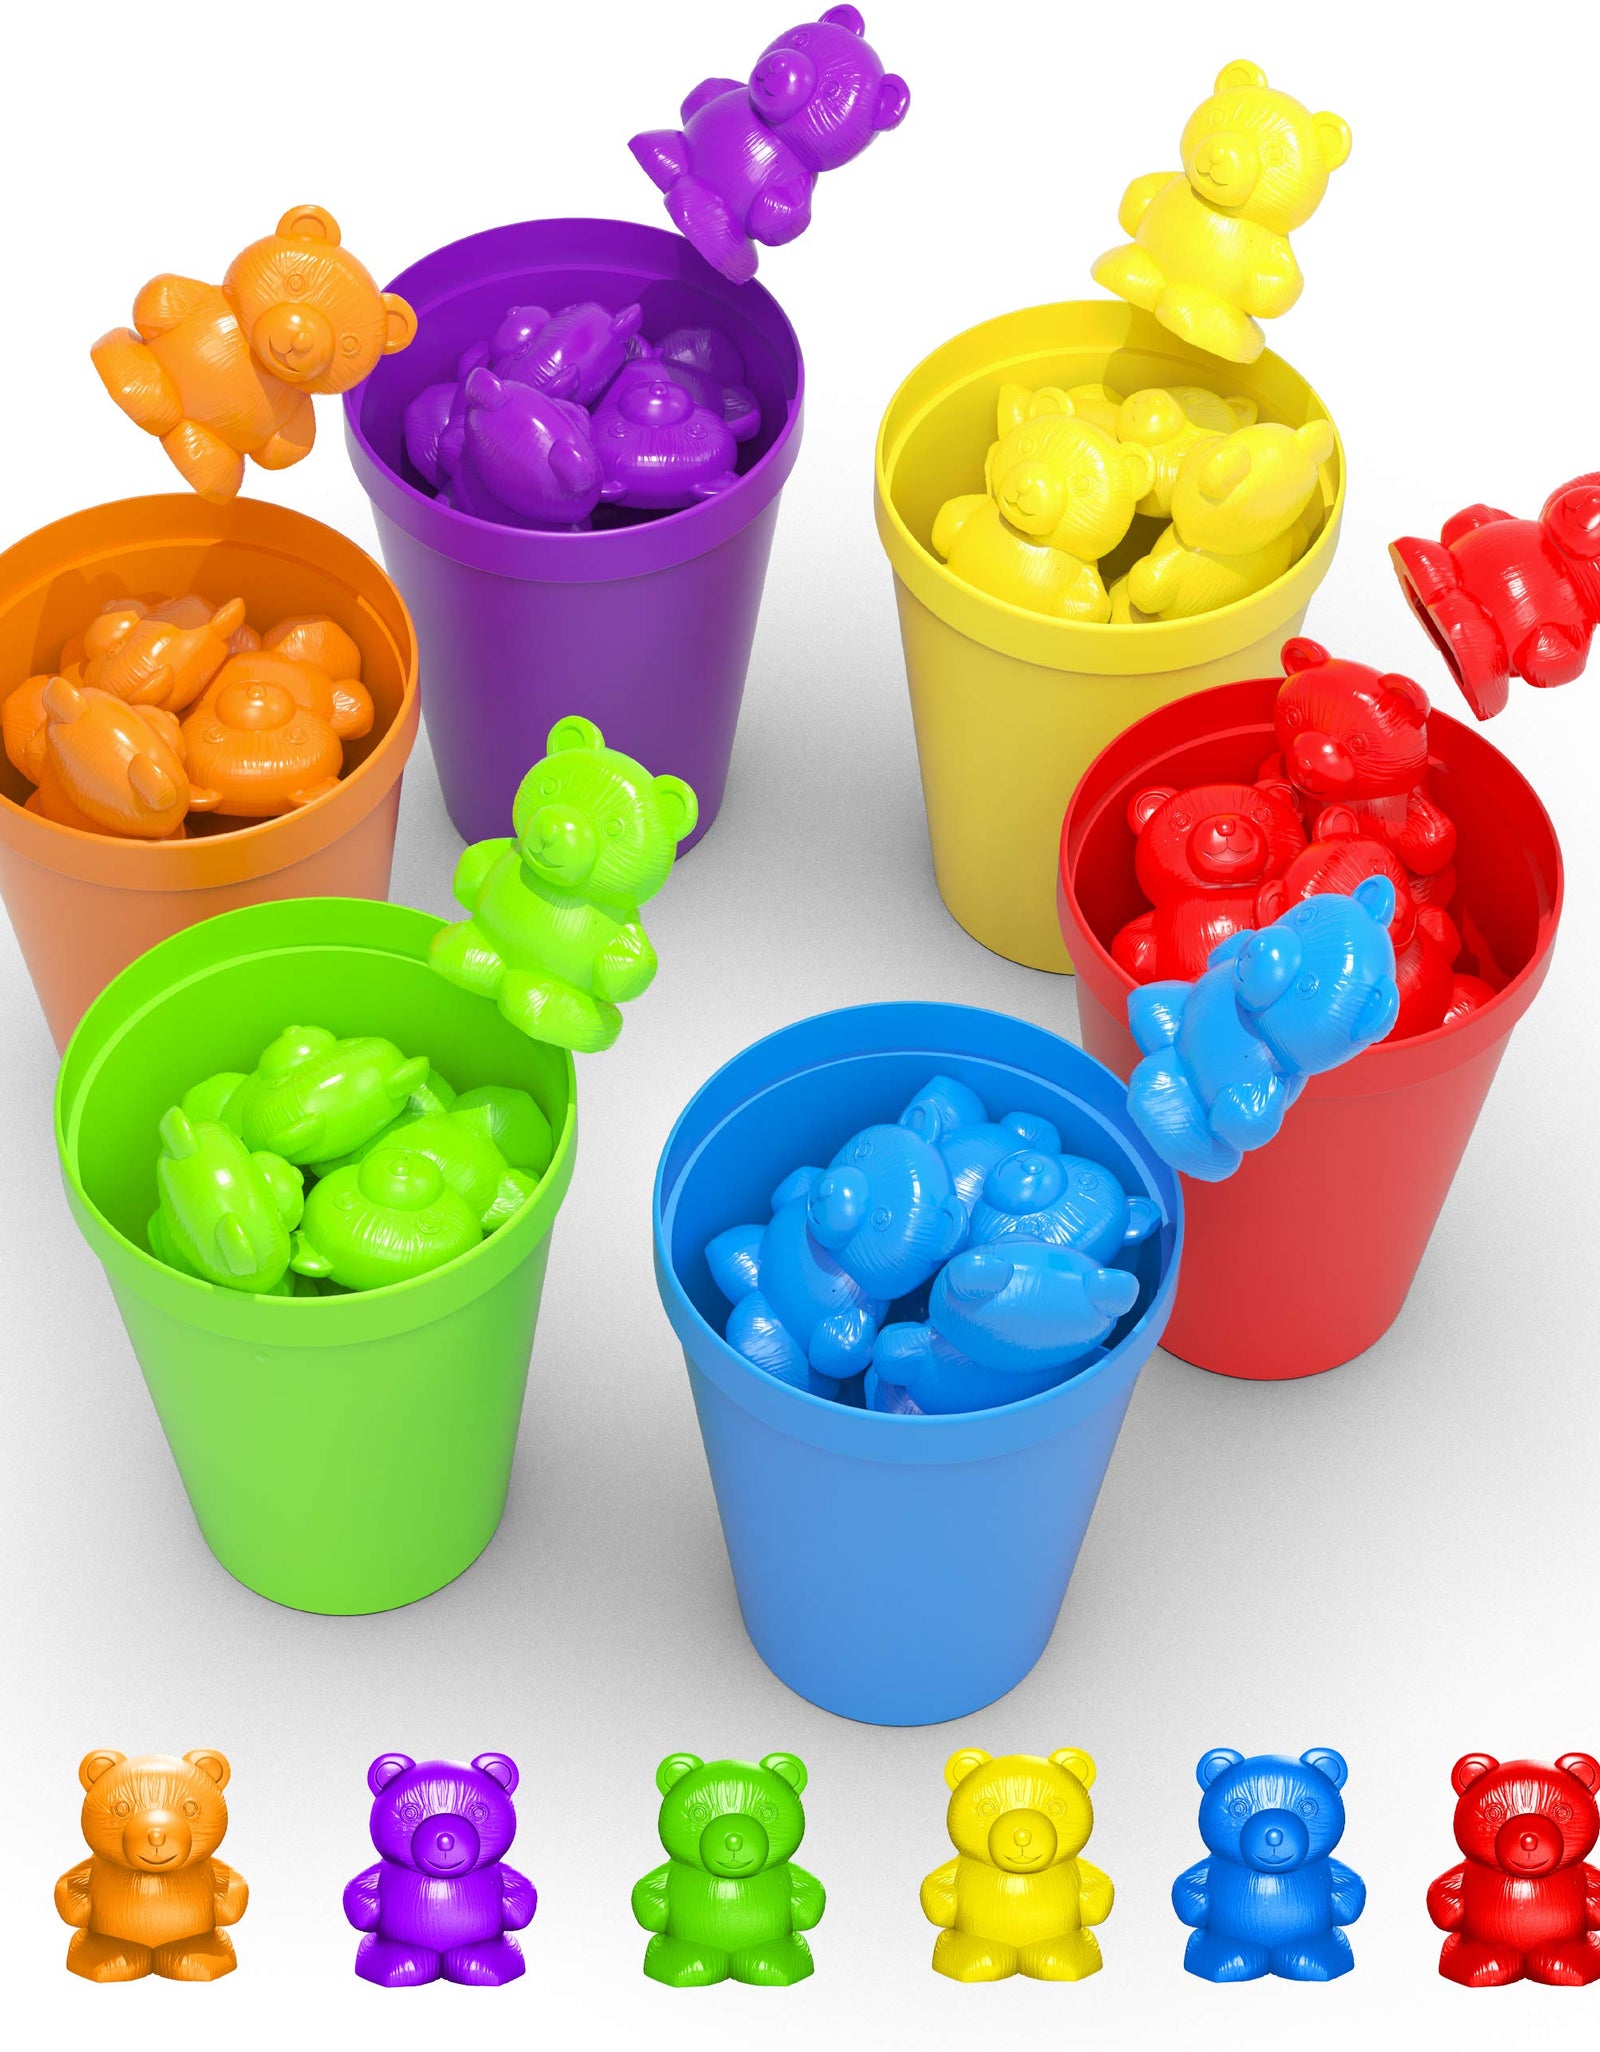 Rainbow Counting Bears With Matching Sorting Cups (67 Pcs Set) + FREE Storage Bag | STEM Educational Gift For Toddler | Montessori Sorting And Counting Toy | Pre-School Color Learning Toy For Children